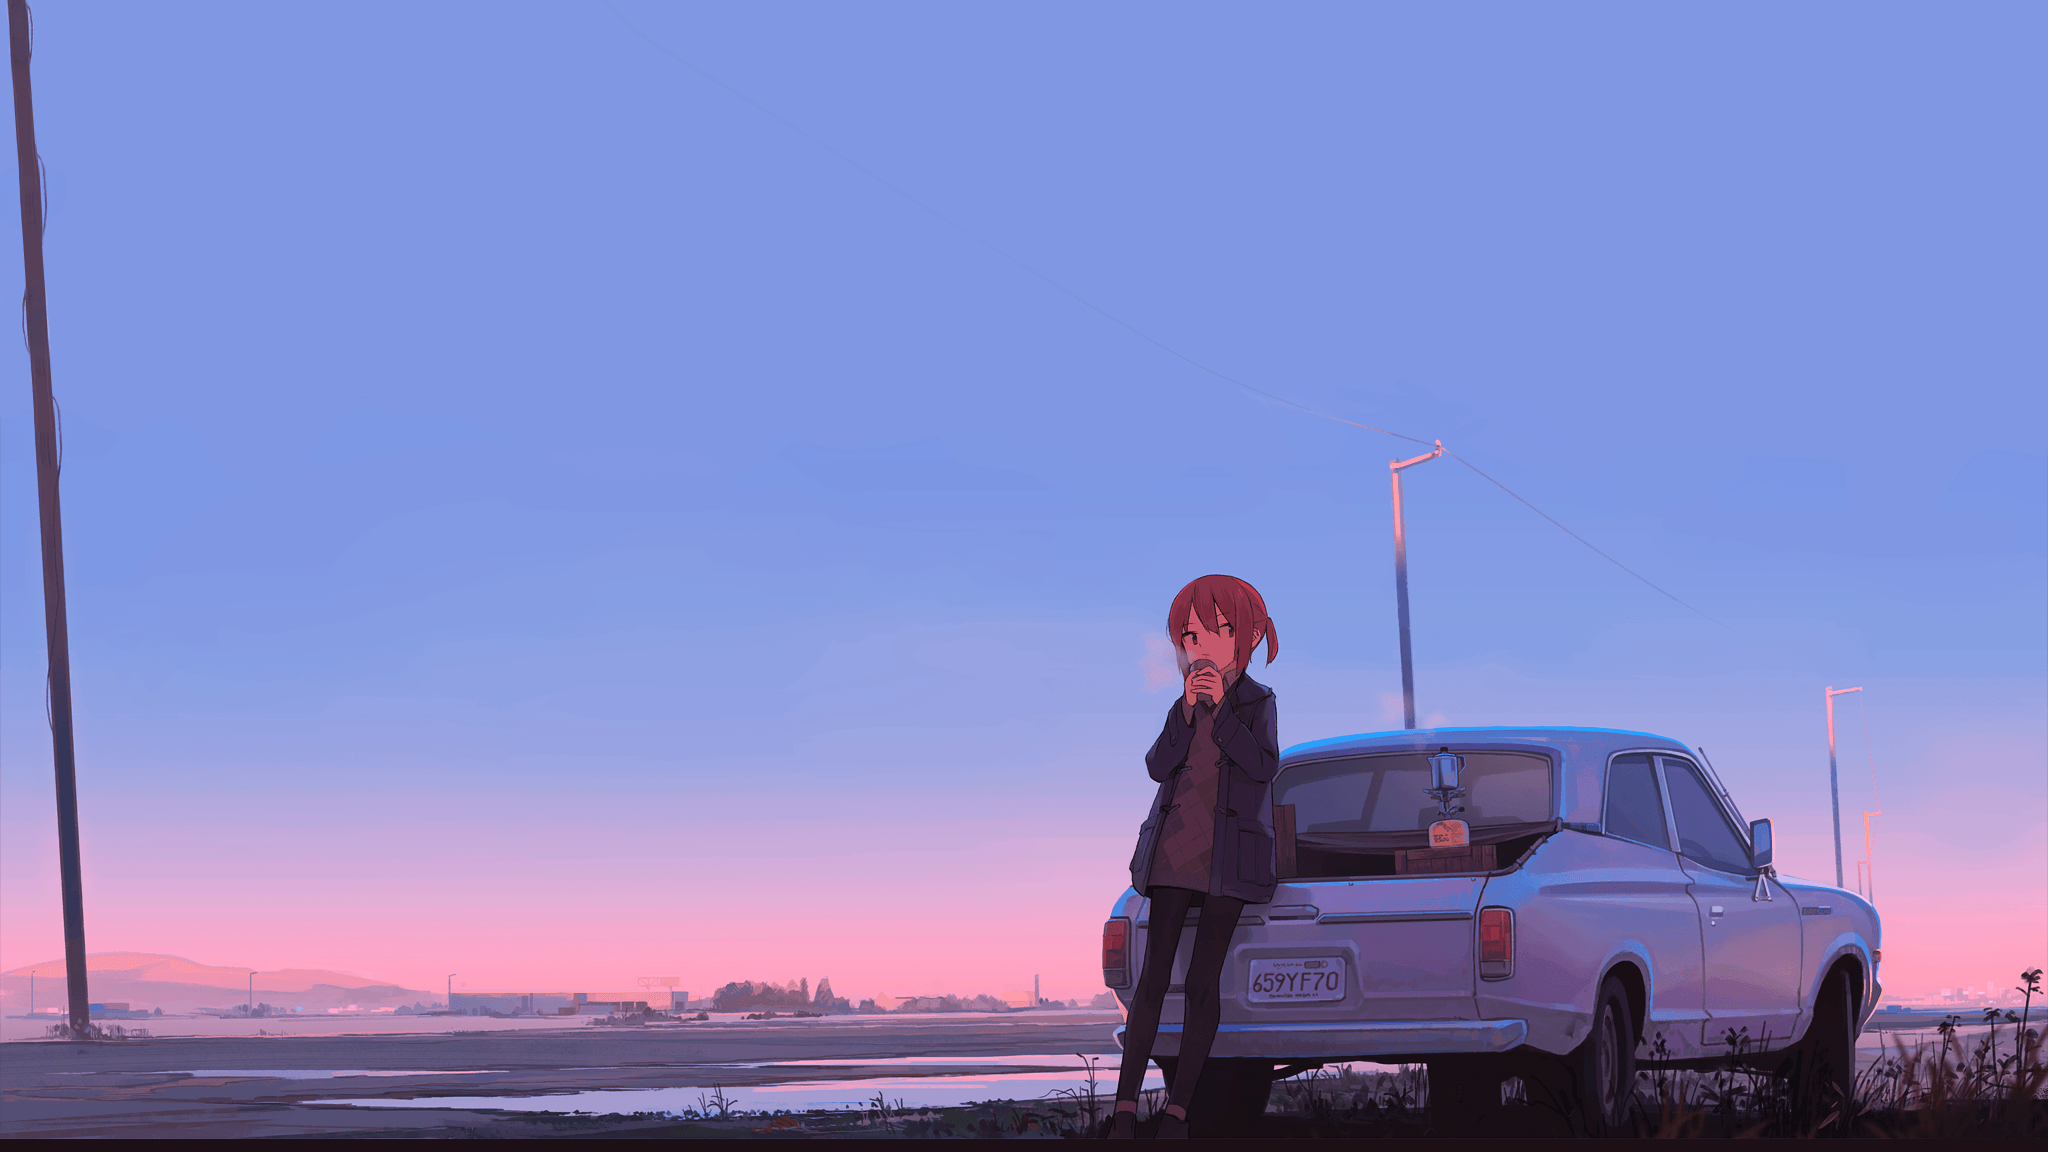 Chill Anime Wallpaper On